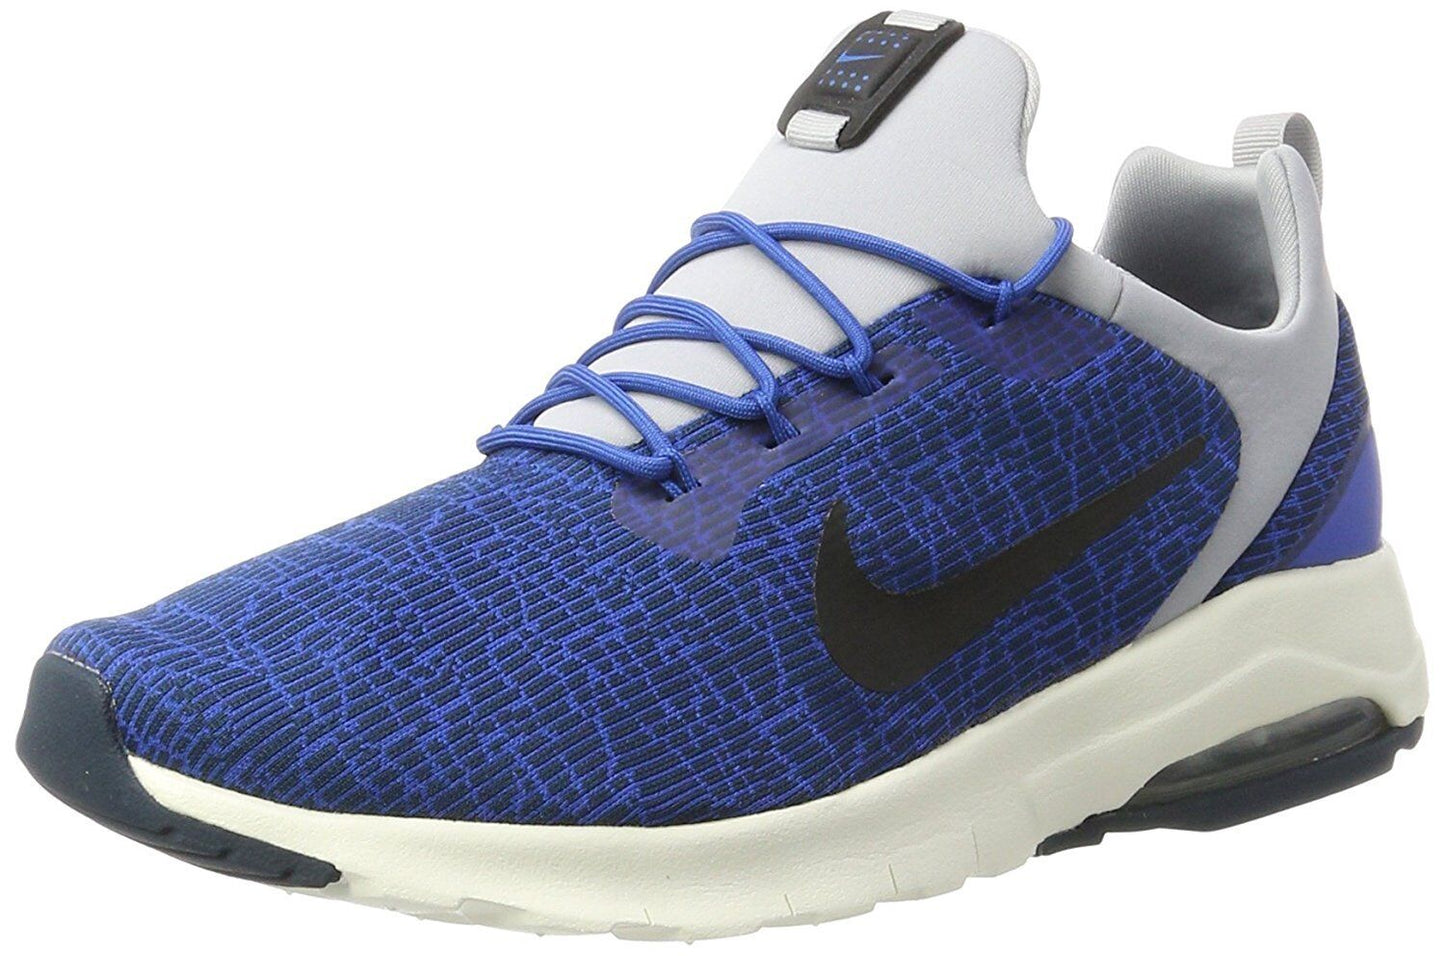 Men's Nike Air Max Motion Racer Casual Shoes, 916771 400 Multi Sizes Blue Jay/Black/Armory Navy